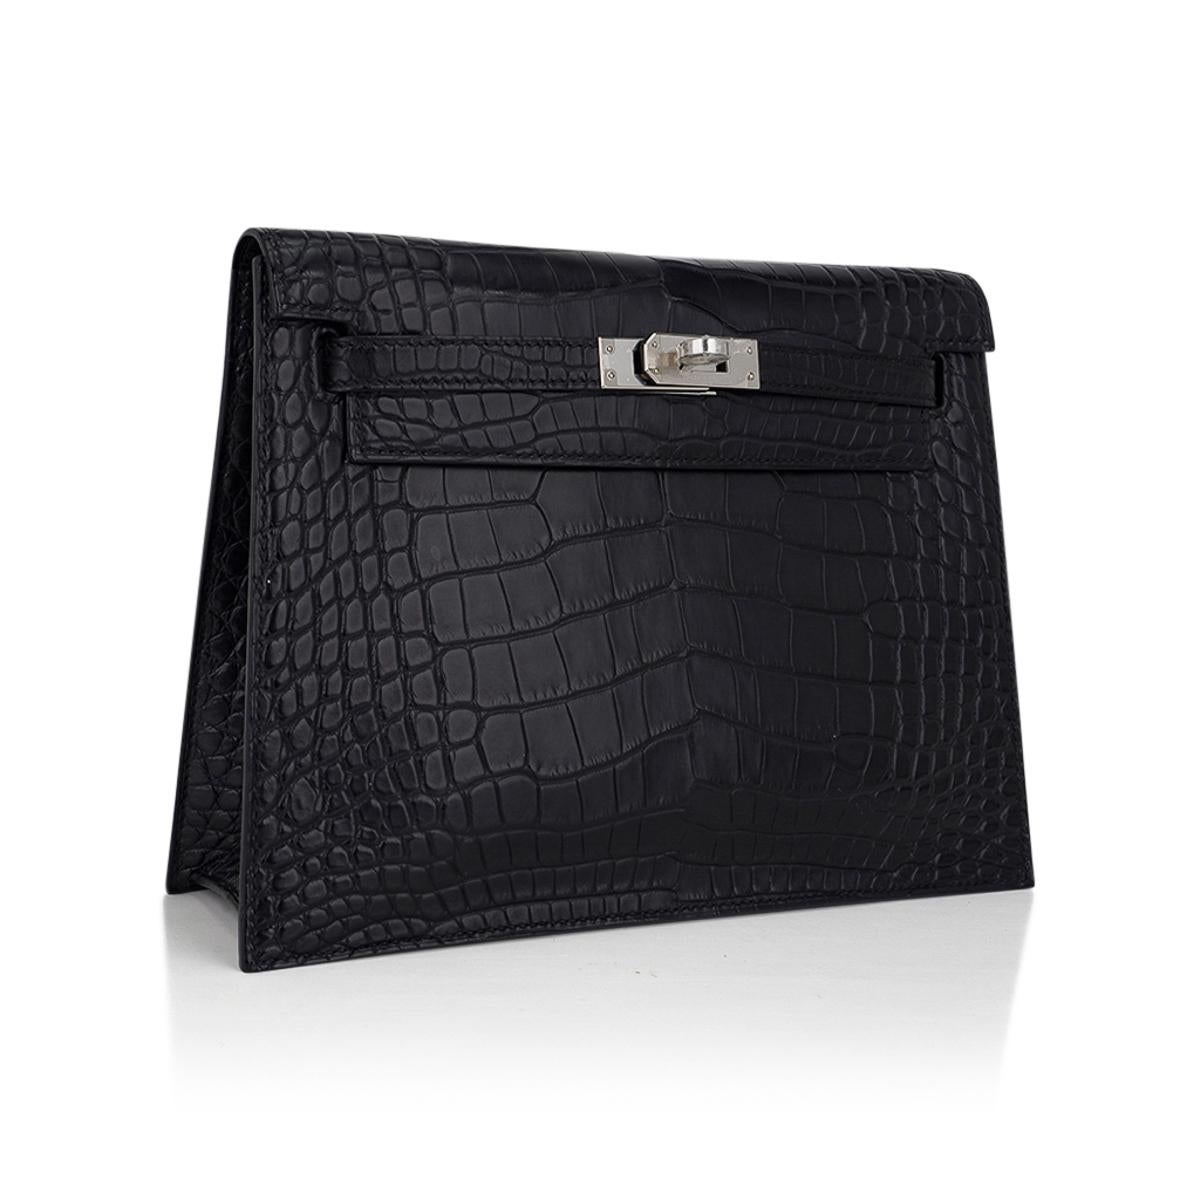 Mightychic offers a Limited Edition Hermes Kelly Danse bag in matte Black Crocodile with crisp palladium hardware.
So rare, many believe it never existed! And even more rare in Crocodile!
This Kelly Danse is the most versatile bag created by the